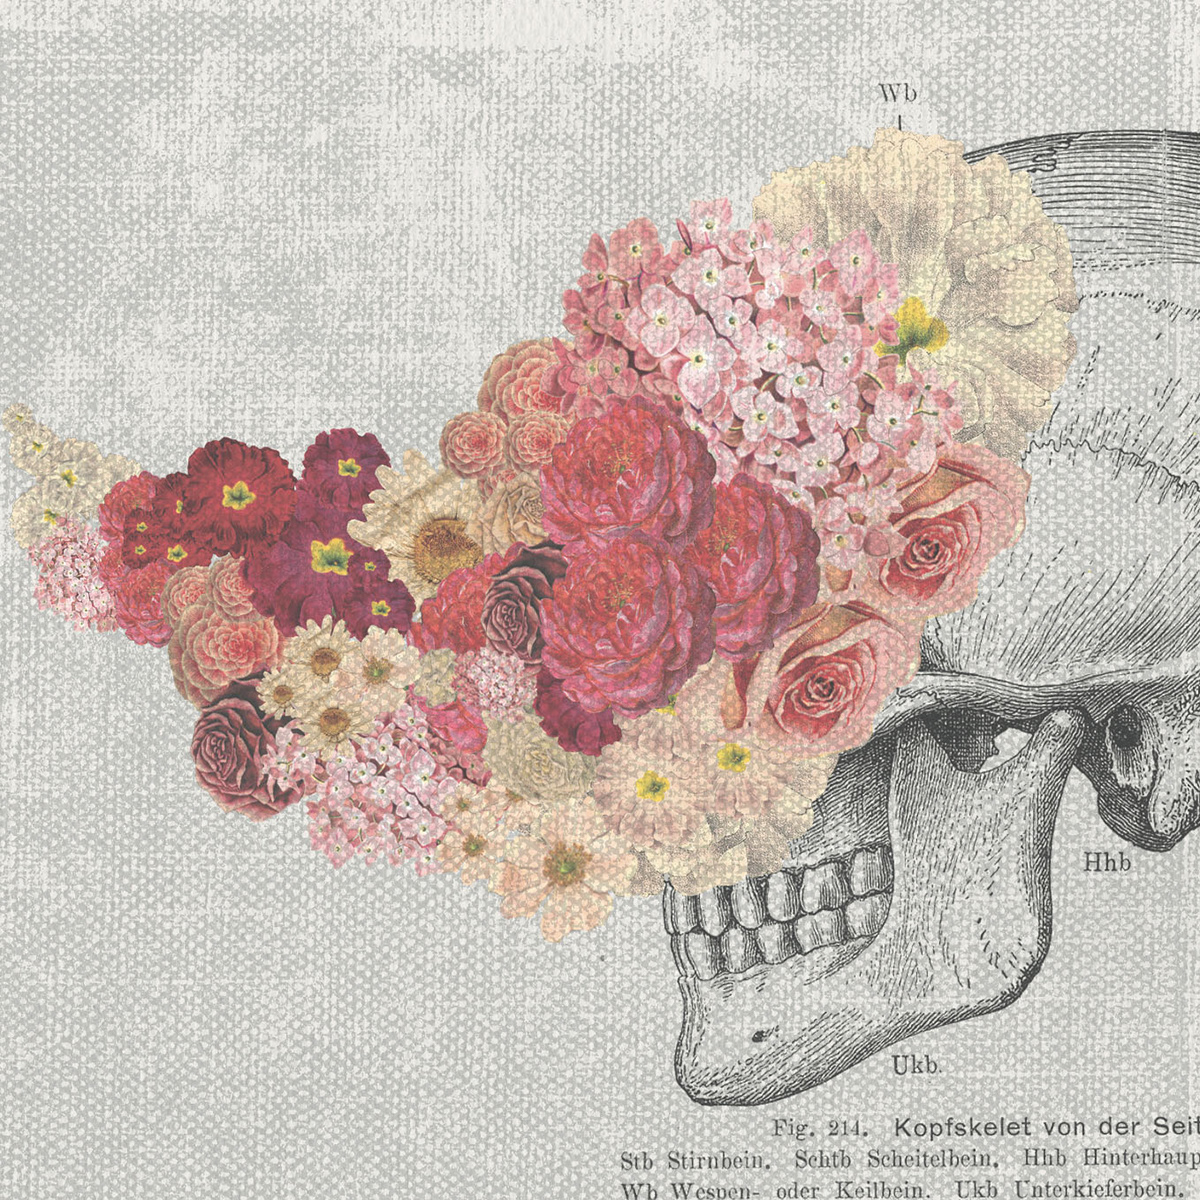 forest woods deer Gun Hunting city cityscape rooftop rooftop view collage vintage skull Flowers Nature wood trees wild animals watercolor Handlettering handmade mixed media fine art pen drawing pen and ink salon 91 cape town head shooting beard Mieke Mieke van der Print Media prints kloofstreet photoshop